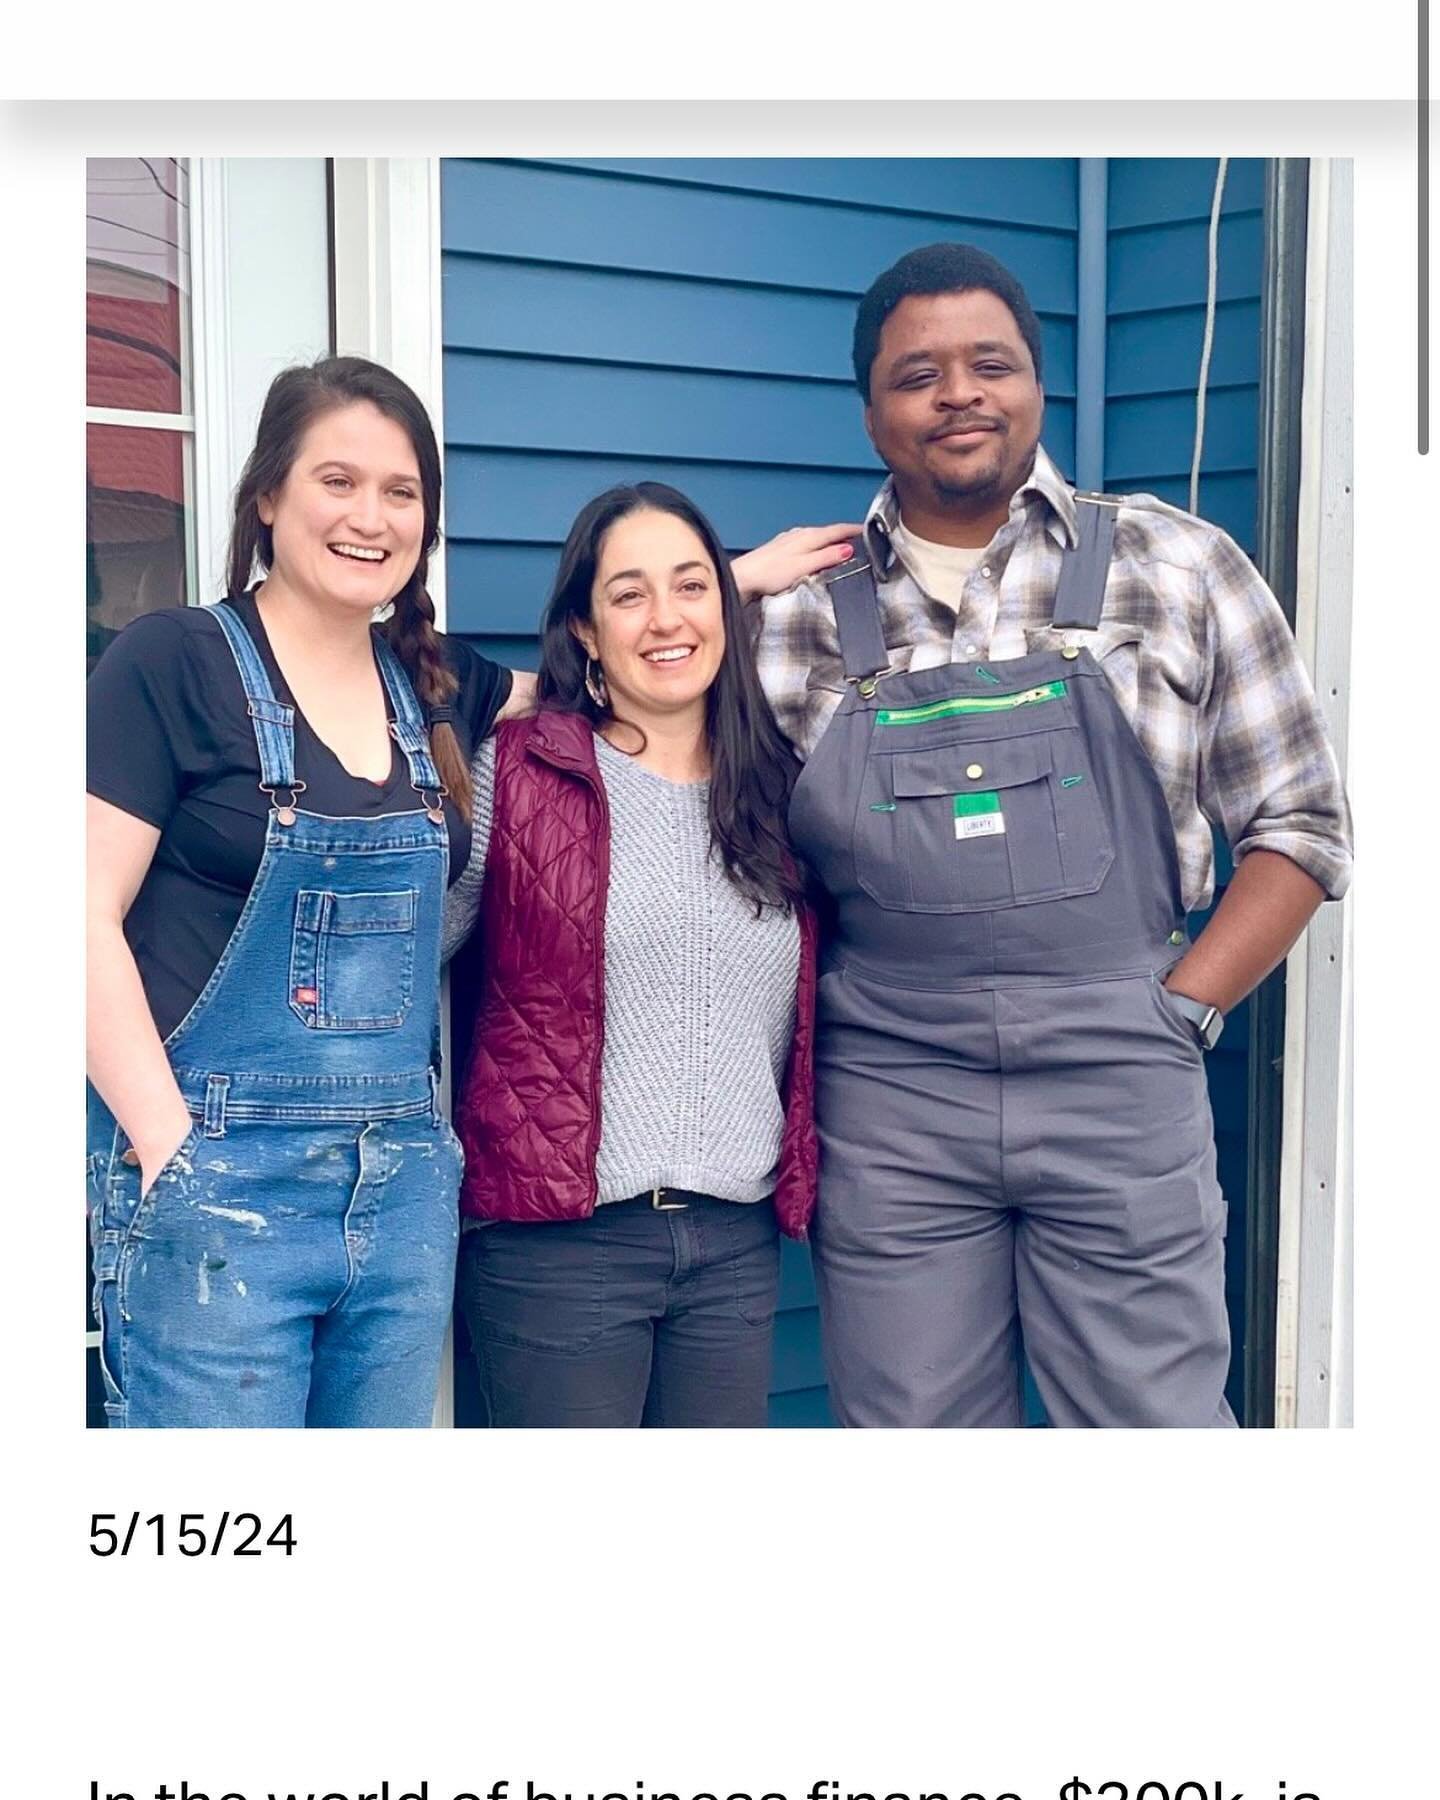 It started with a dream and now we&rsquo;re here. 🌱

So excited to share that we received funding to grow Found &amp; Fixed! 

&hellip;

If you&rsquo;ve been following along from the days of furniture fixing in my basement, THANK YOU! 

If you&rsquo